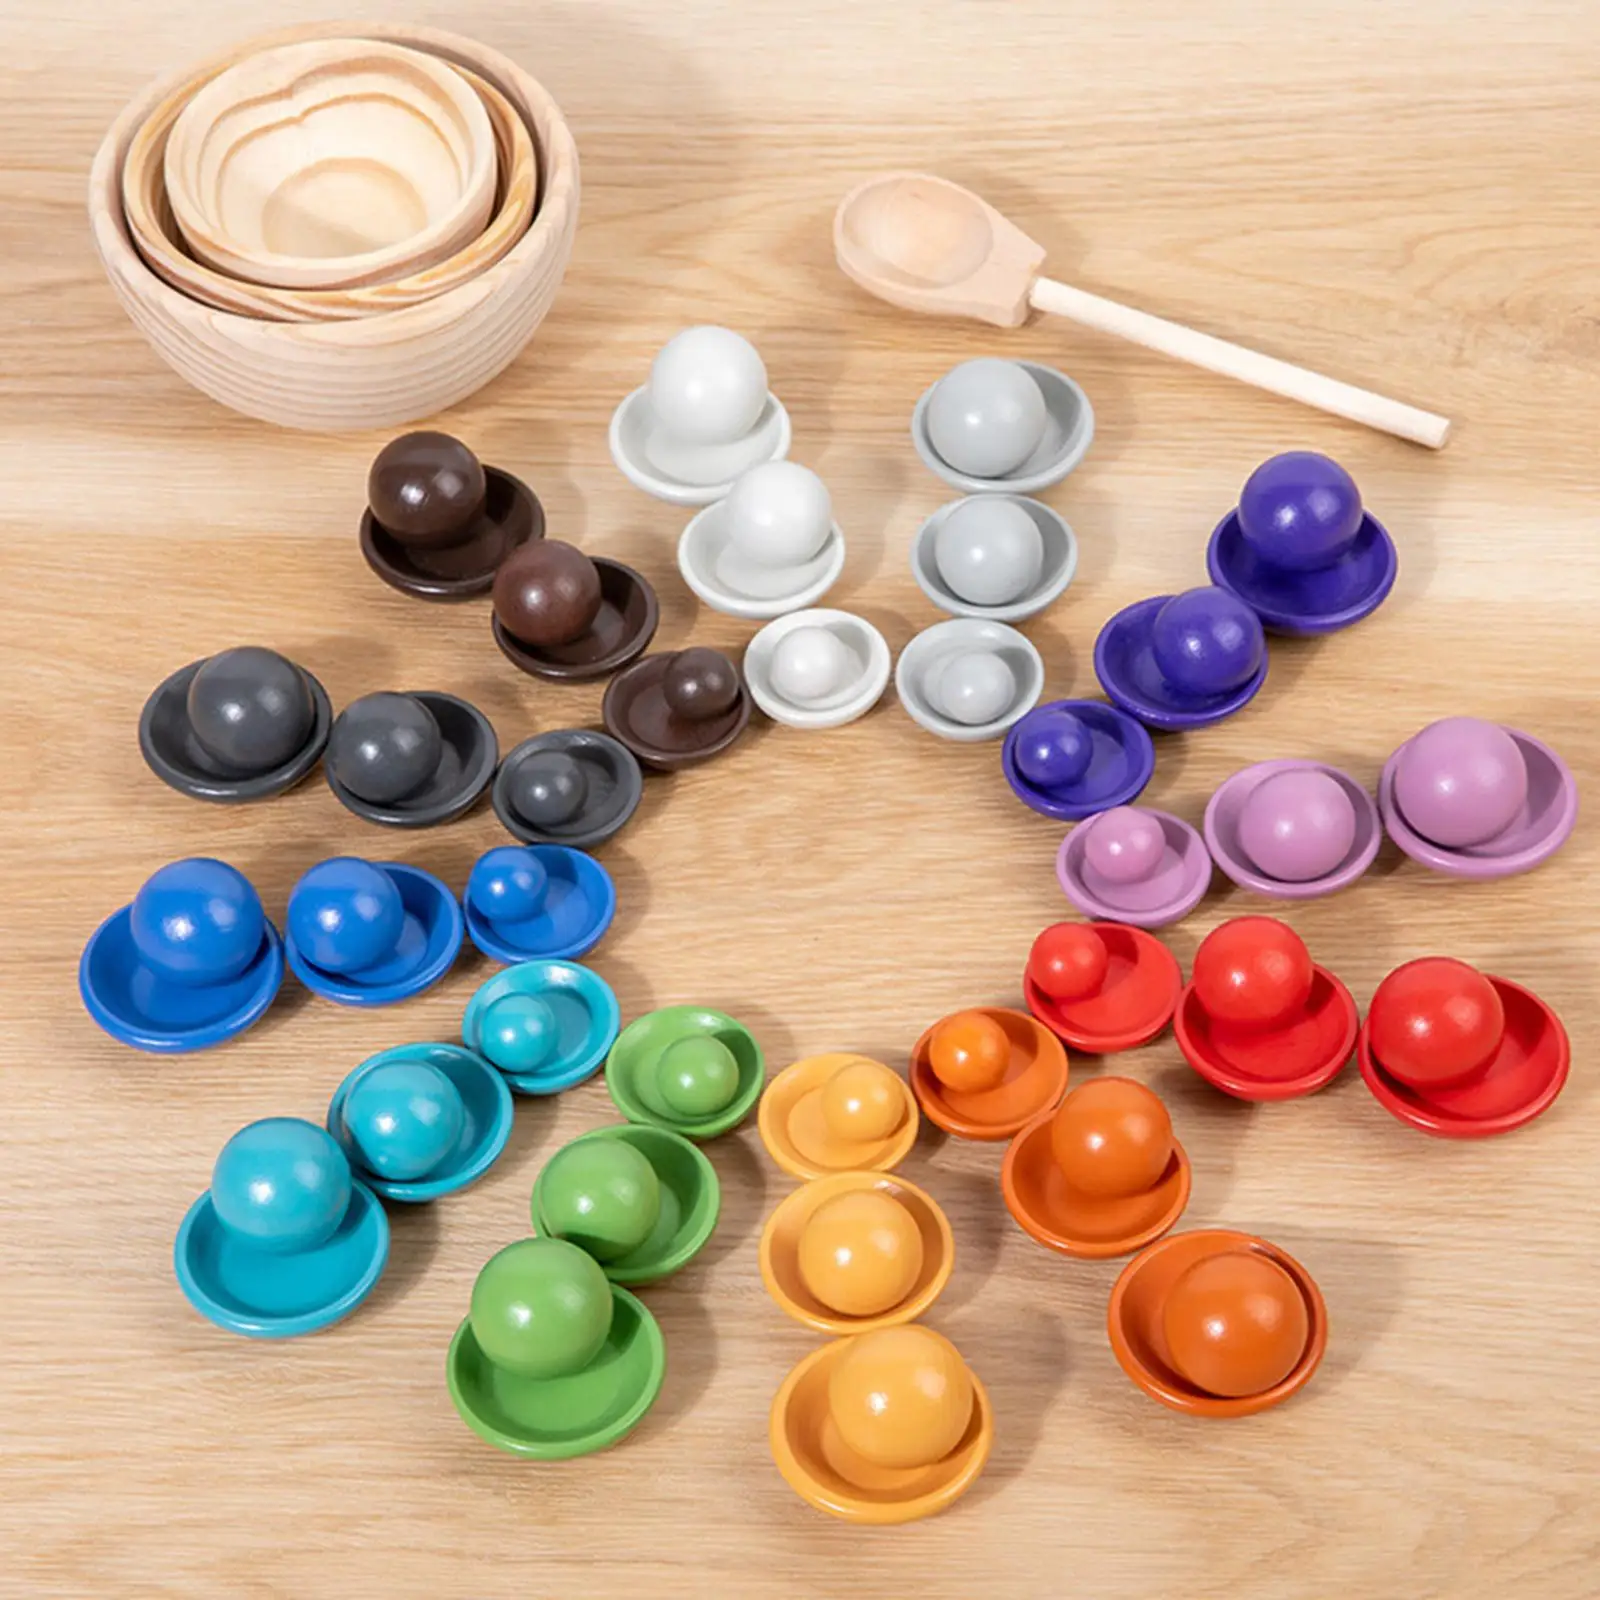 Montessori Wooden Rainbow Ball Matching Game Preschool Learning Toy with 36 Balls Early Education Toys for Age 1+ Xmas Gifts